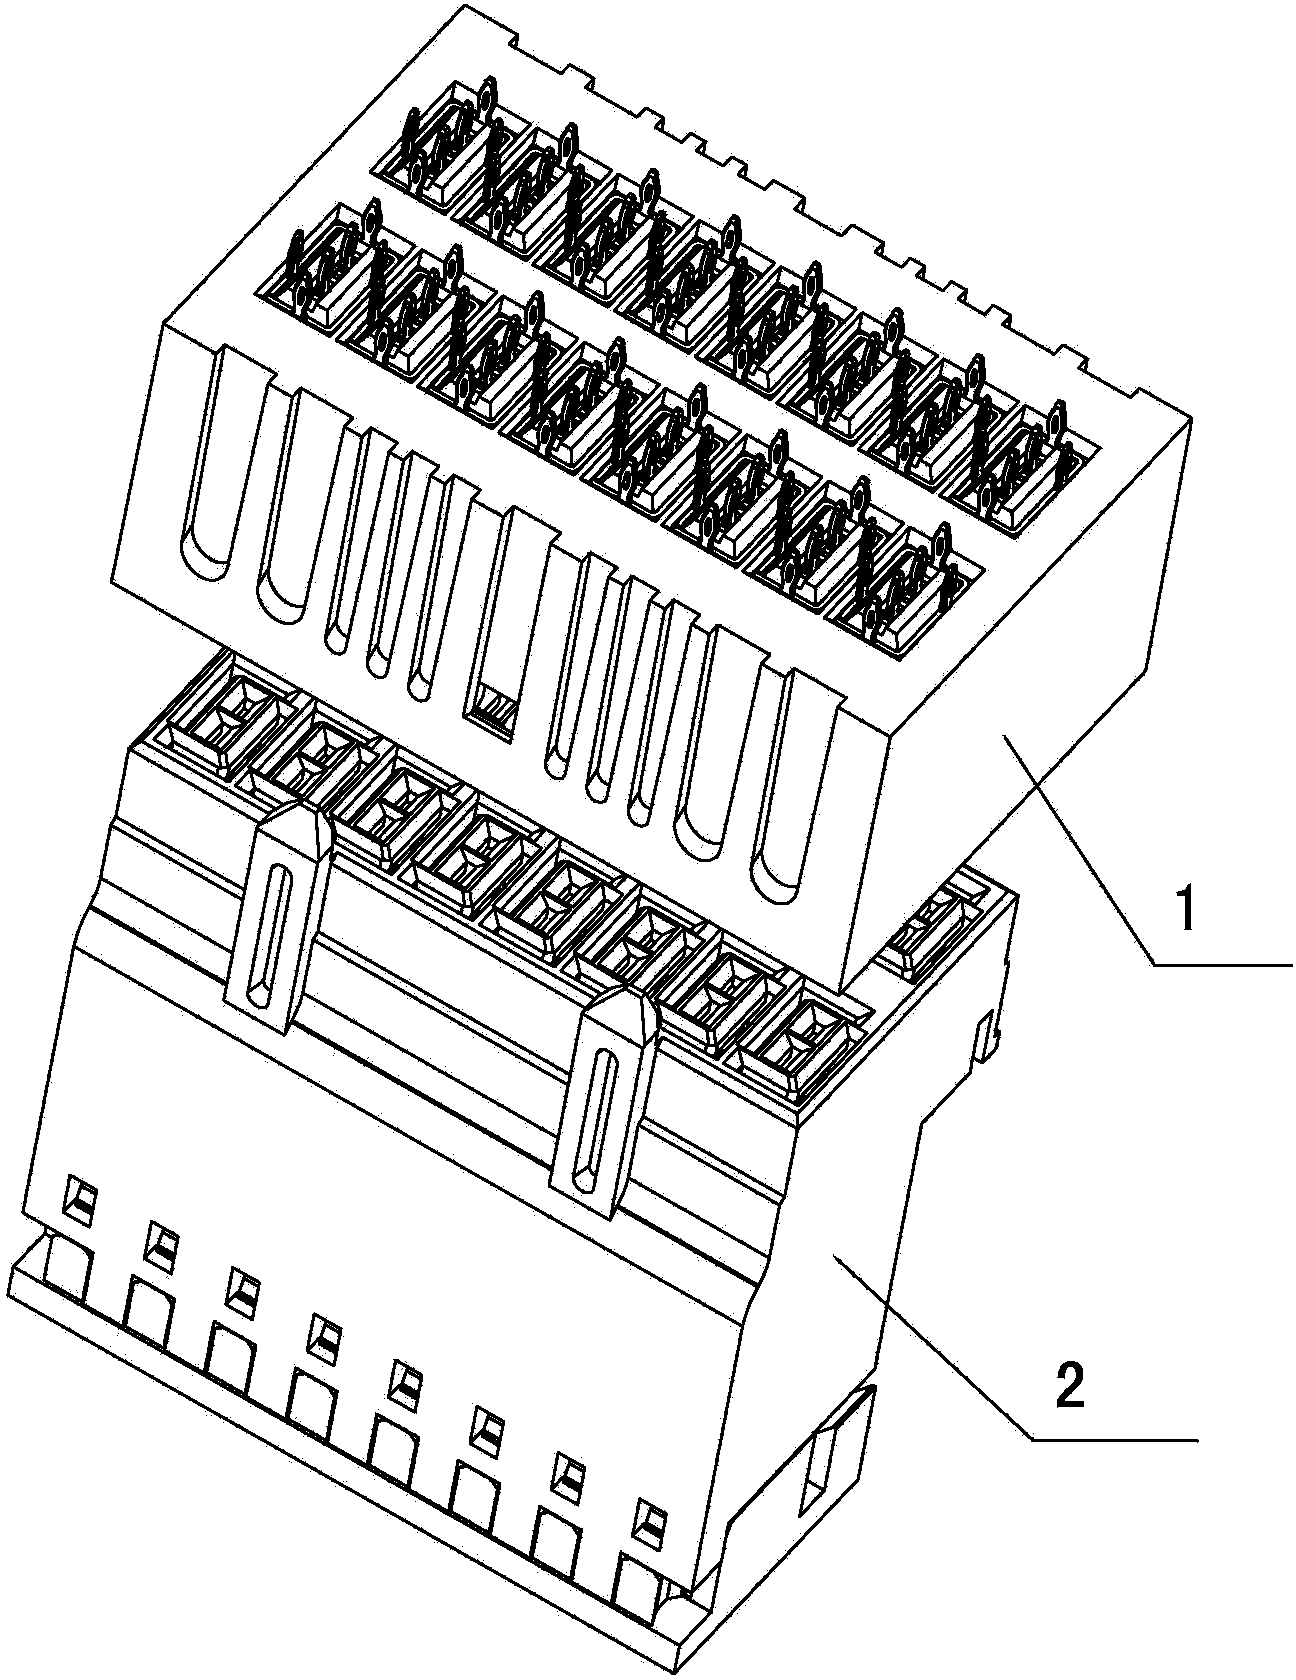 High-speed connector capable of transmitting 25G signals